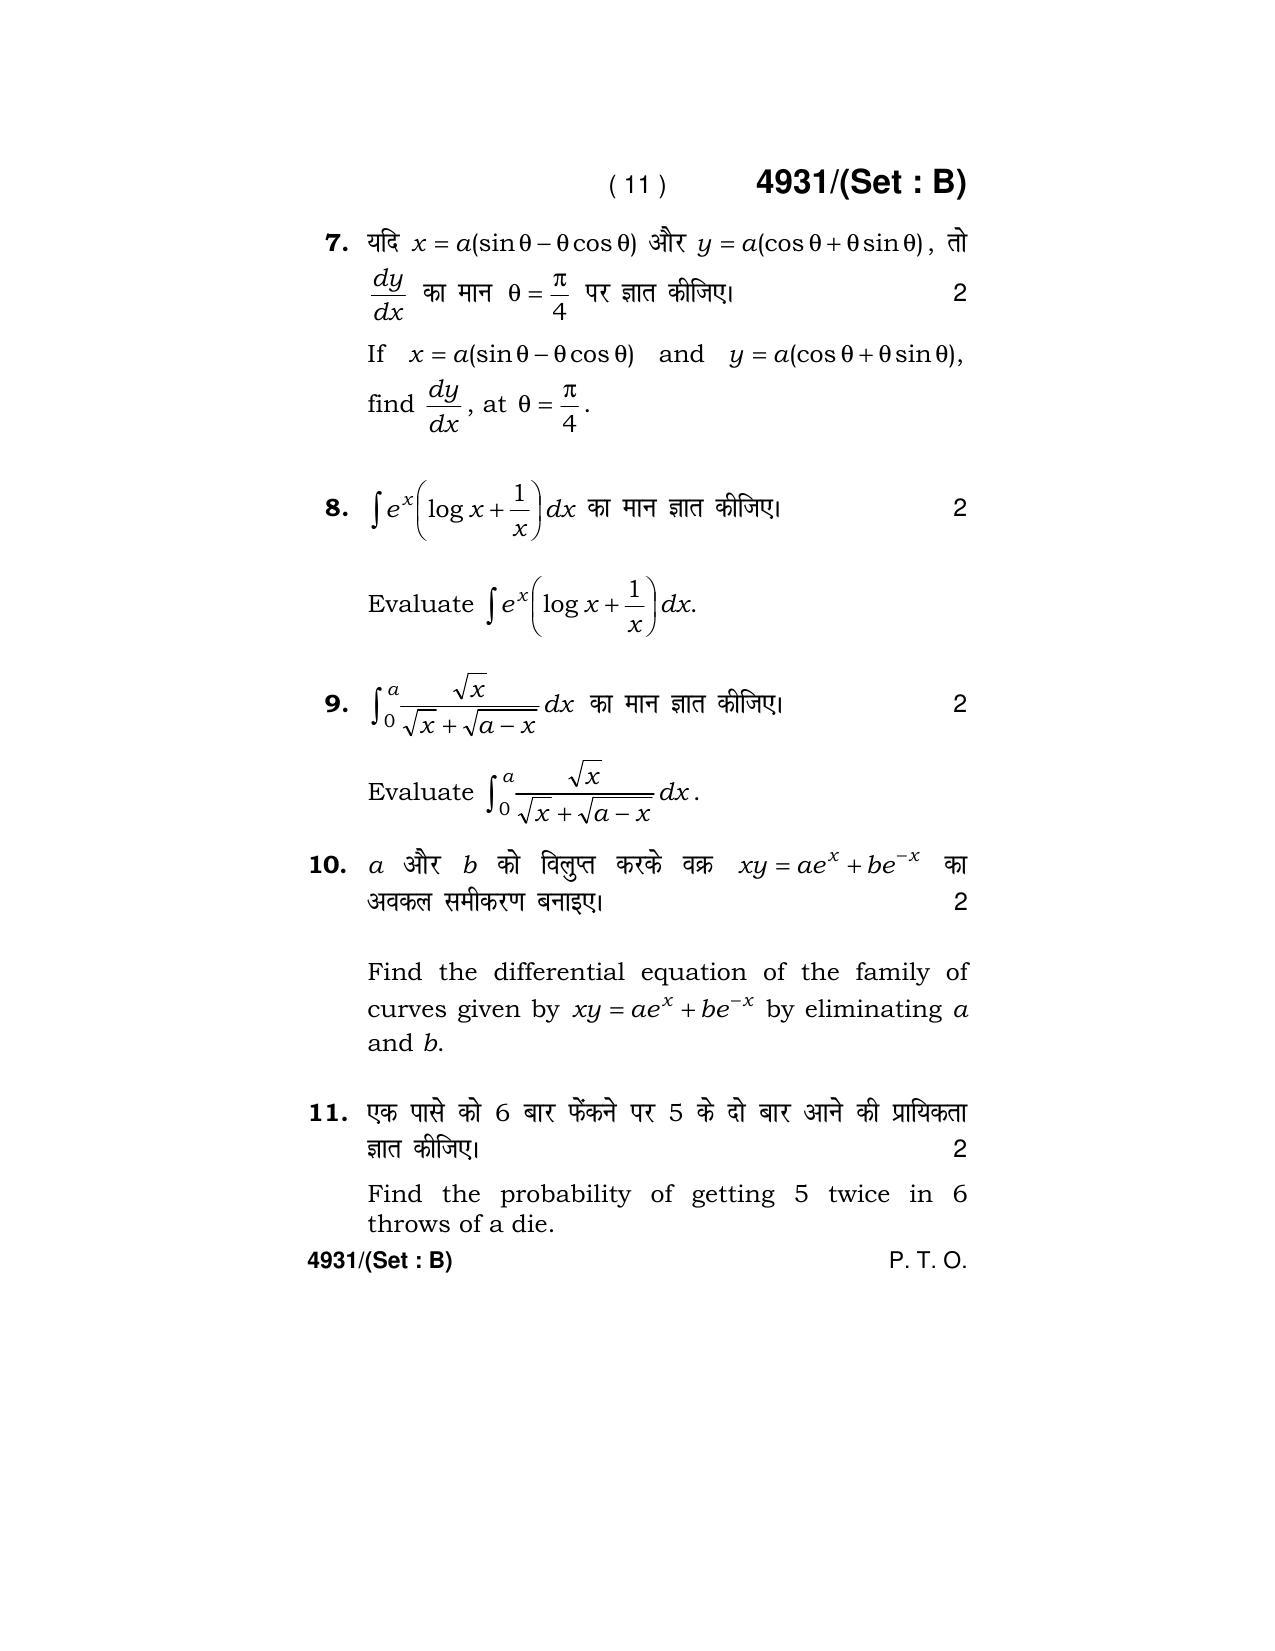 Haryana Board HBSE Class 12 Mathematics 2020 Question Paper - Page 27